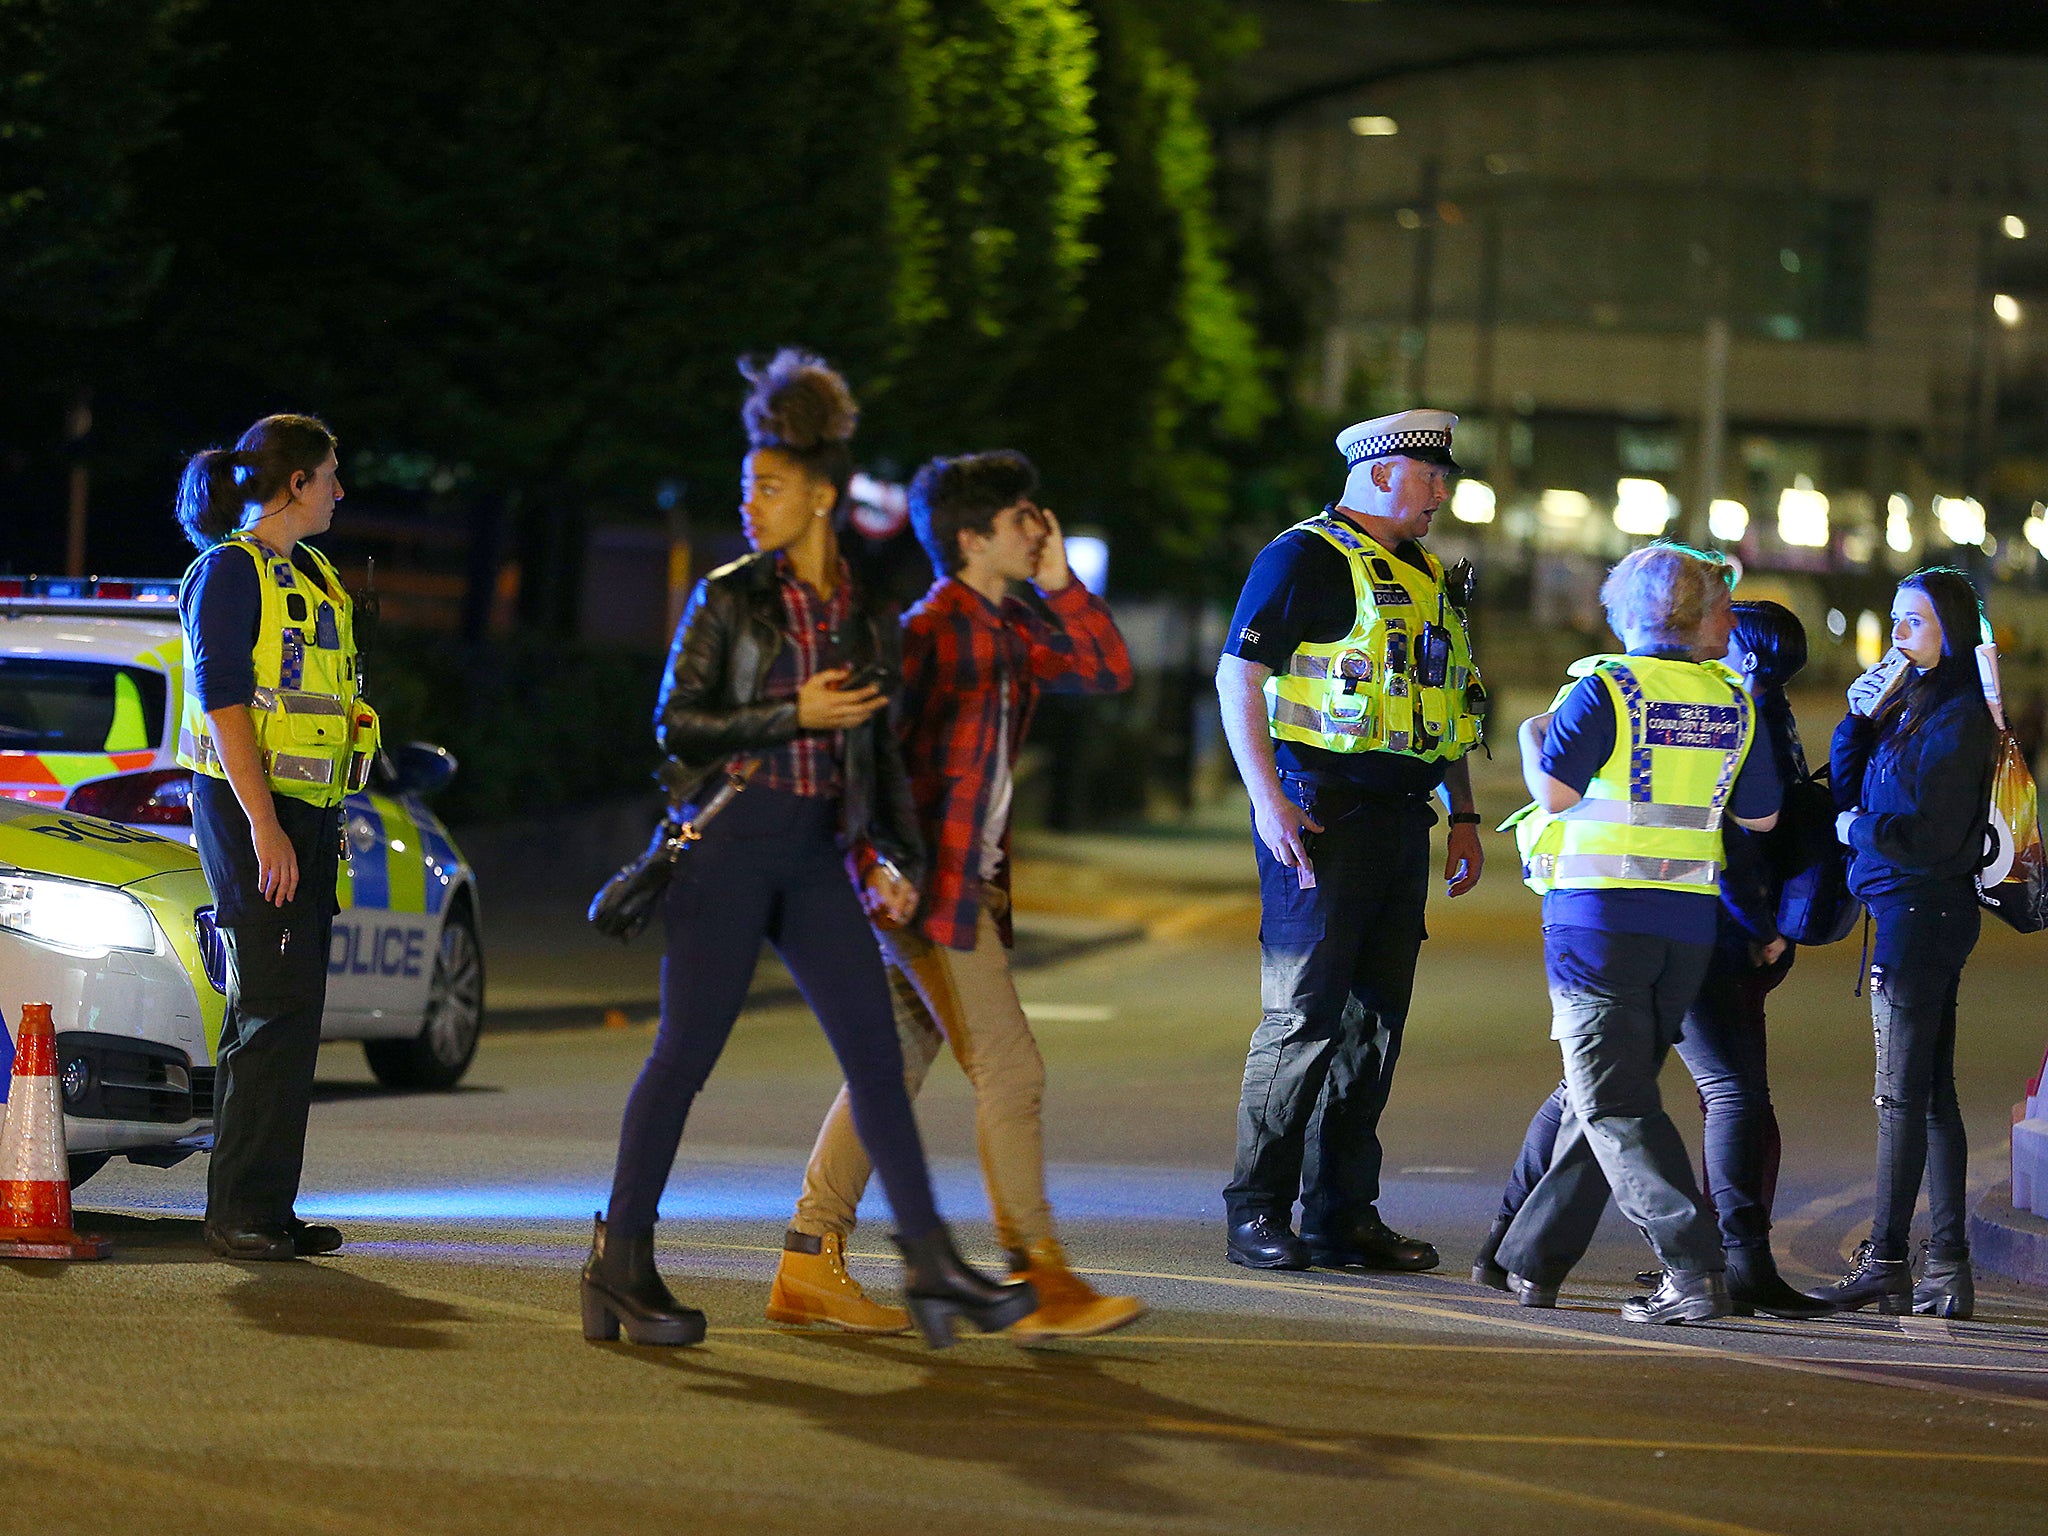 Concert-goers flee the Manchester Arena after an attack on Monday evening, which left 22 dead and 59 injured